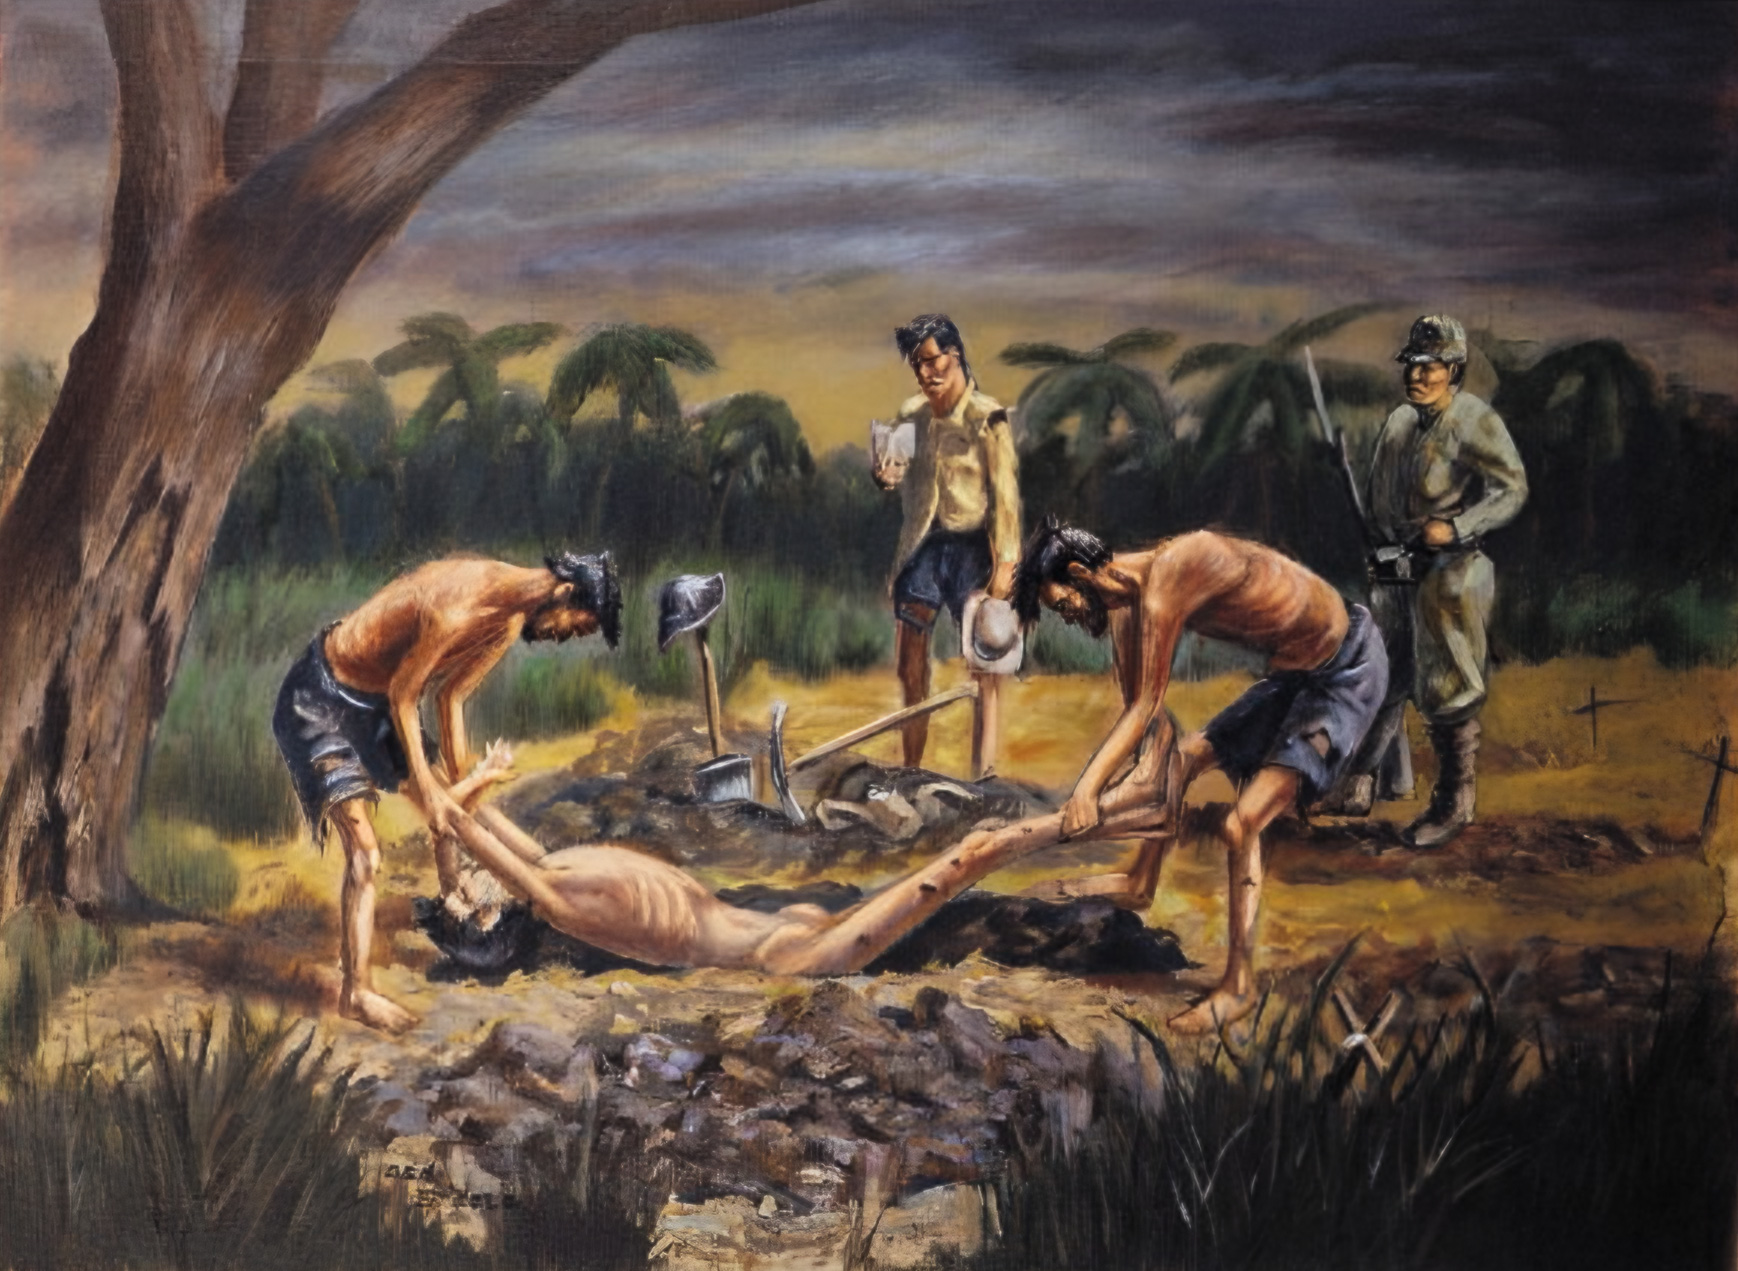 Under the frowning countenance of a Japanese guard, Americans bury one of their own.  Artist Ben Steele saw much of the worst of prisoner life in the Philippines and Japan during World War II.